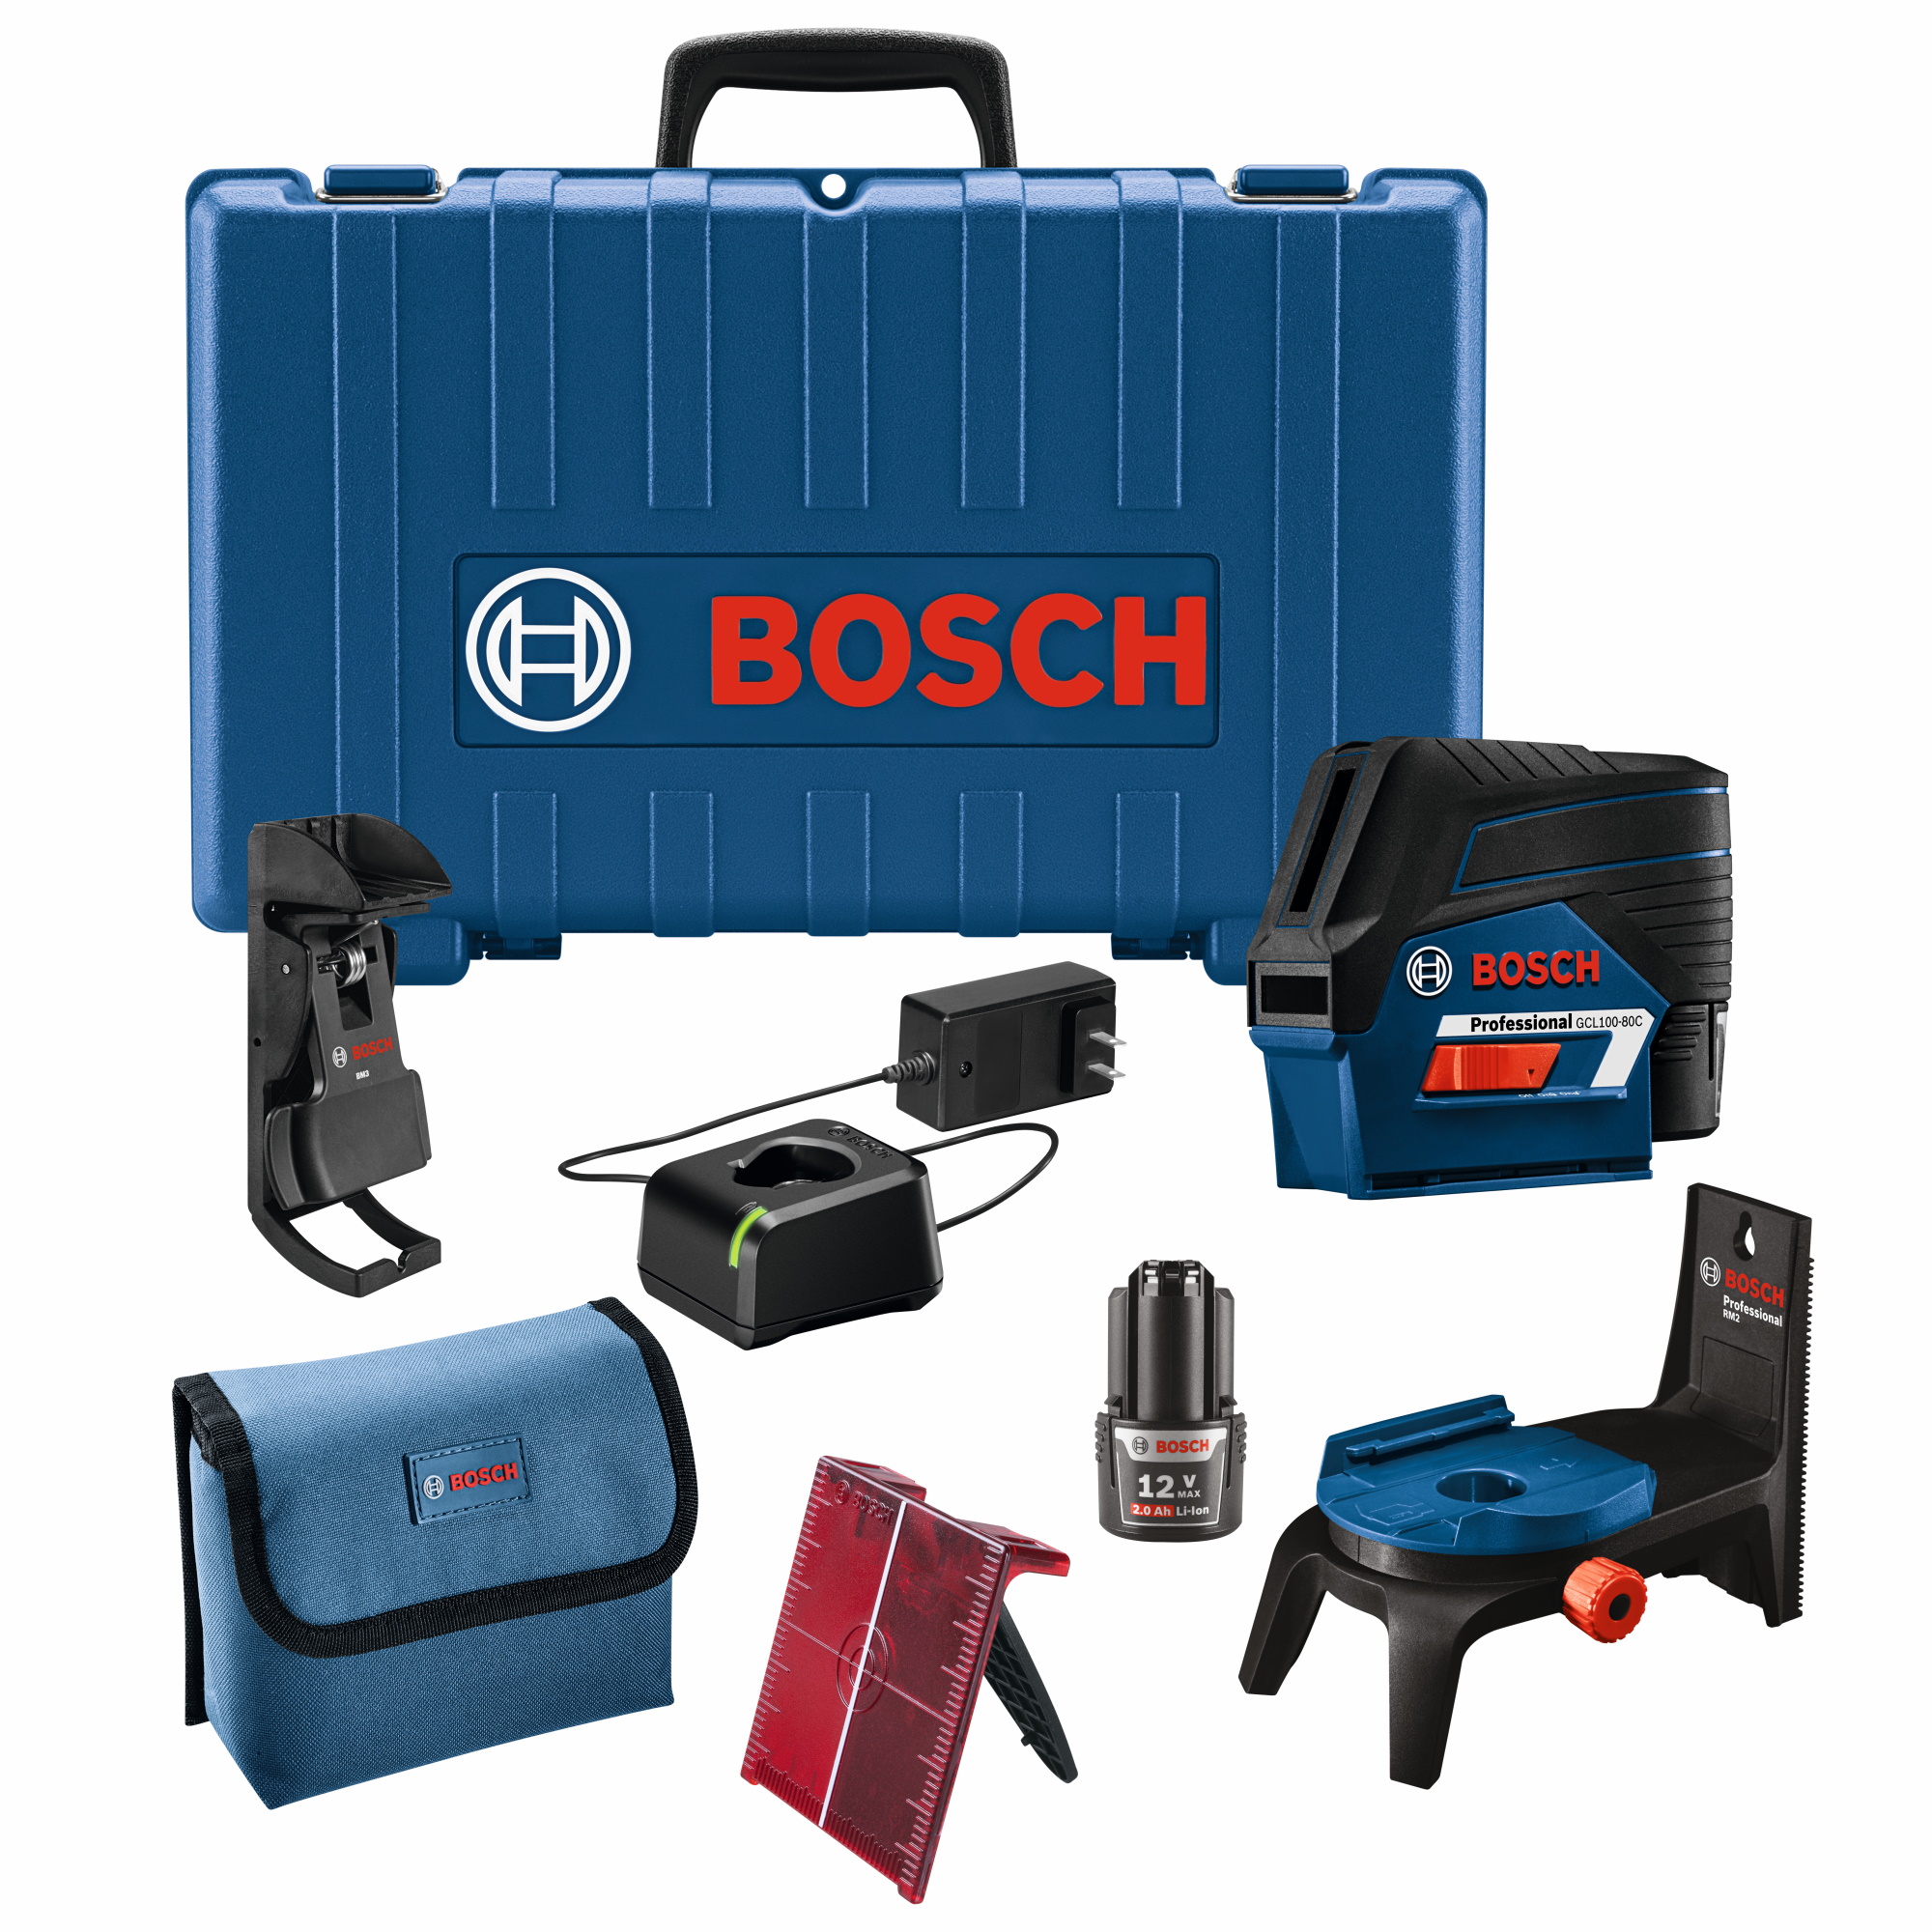 Bosch 12V Max Connected Cross-Line